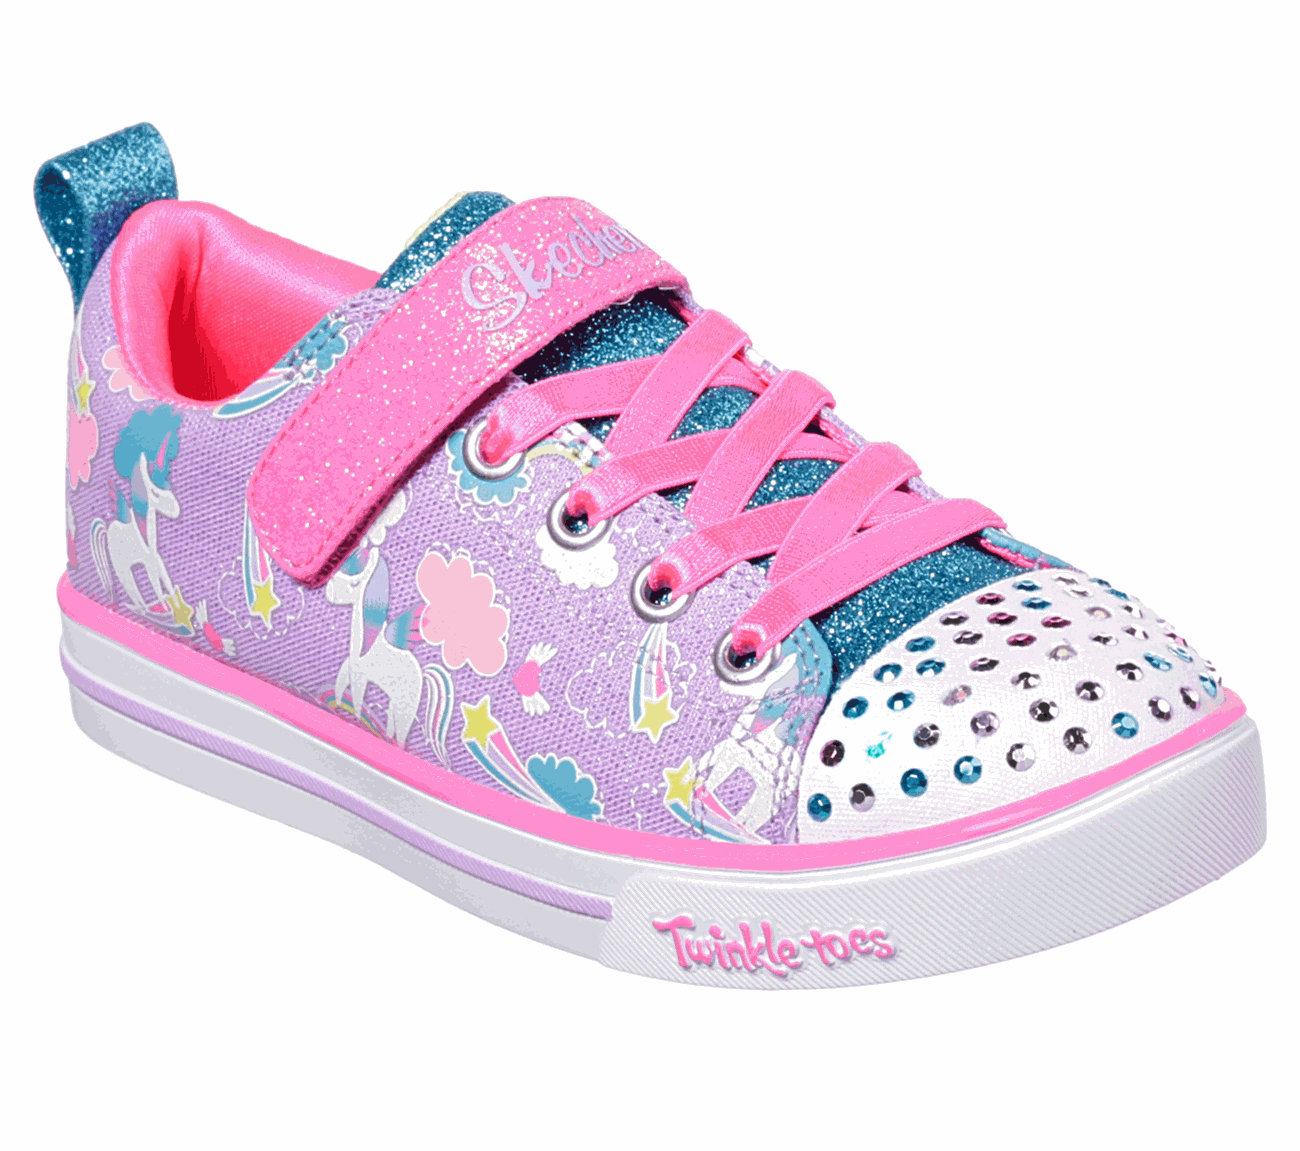 what stores sell skechers twinkle toes